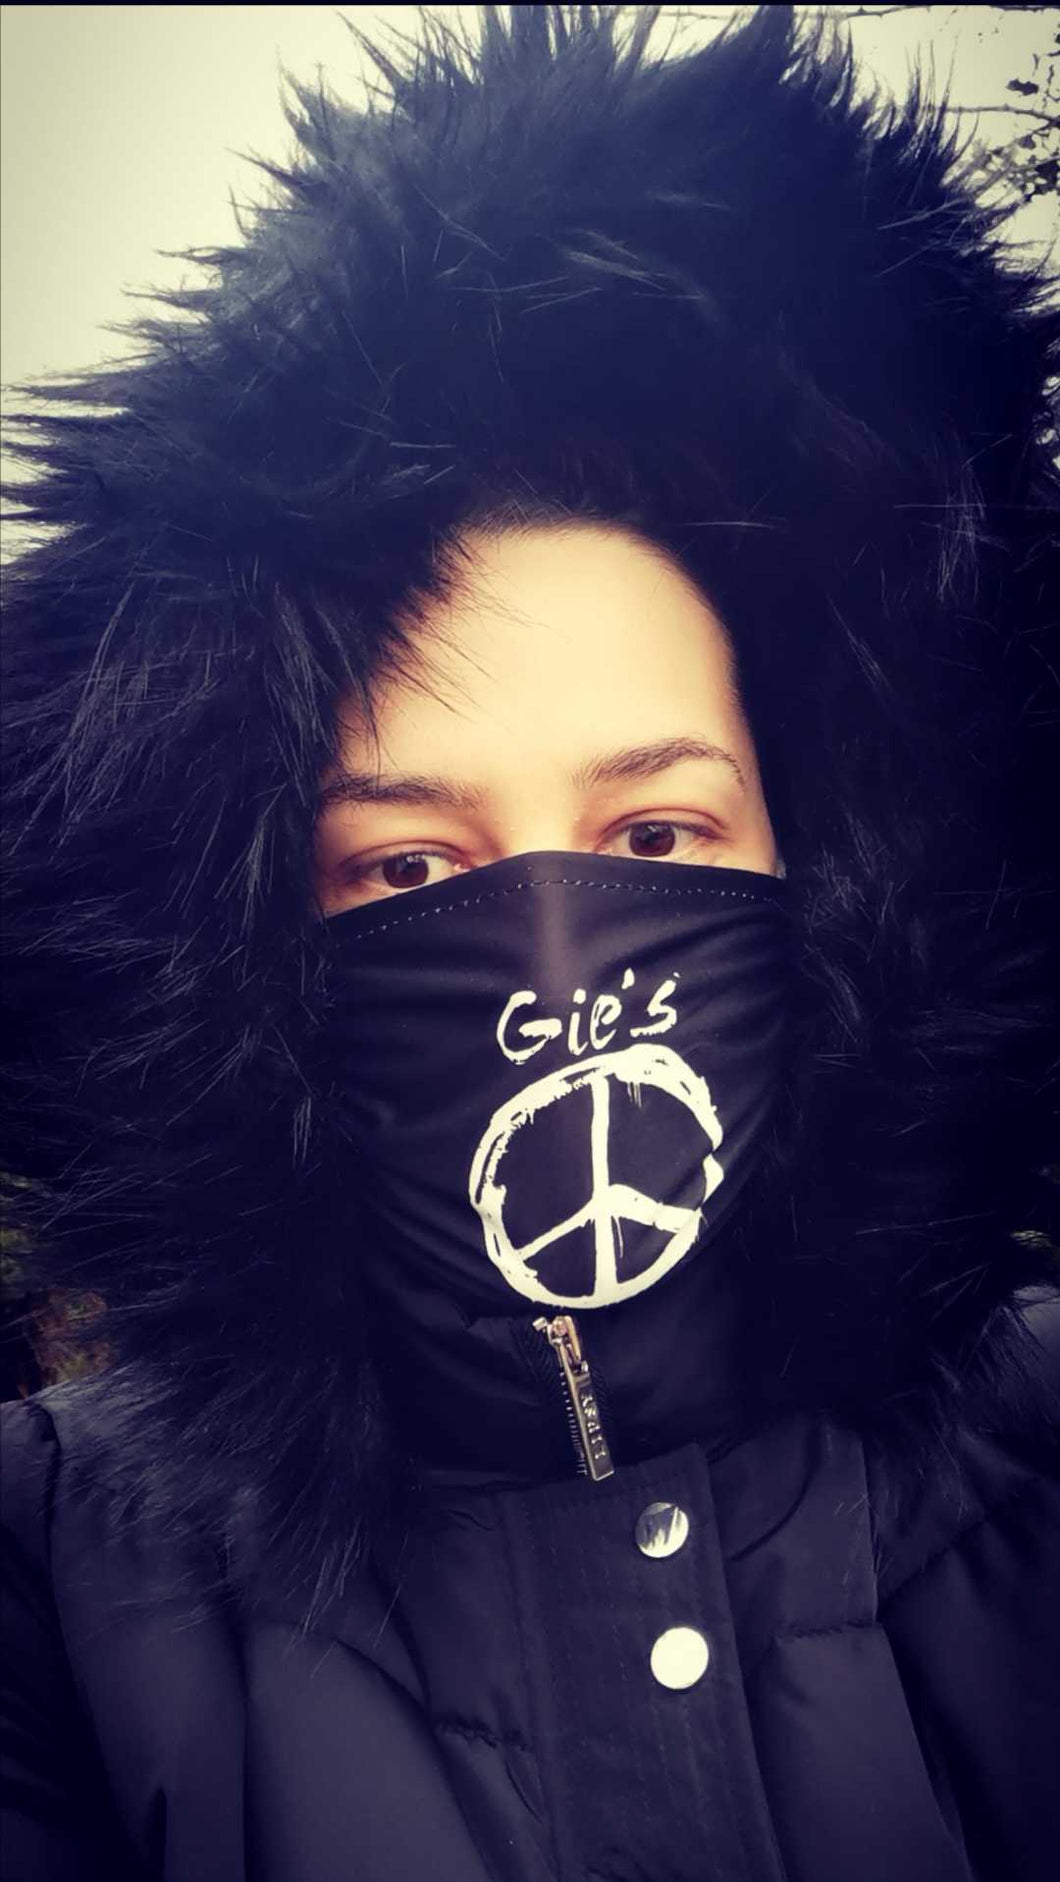 Gie's Peace Face Mask